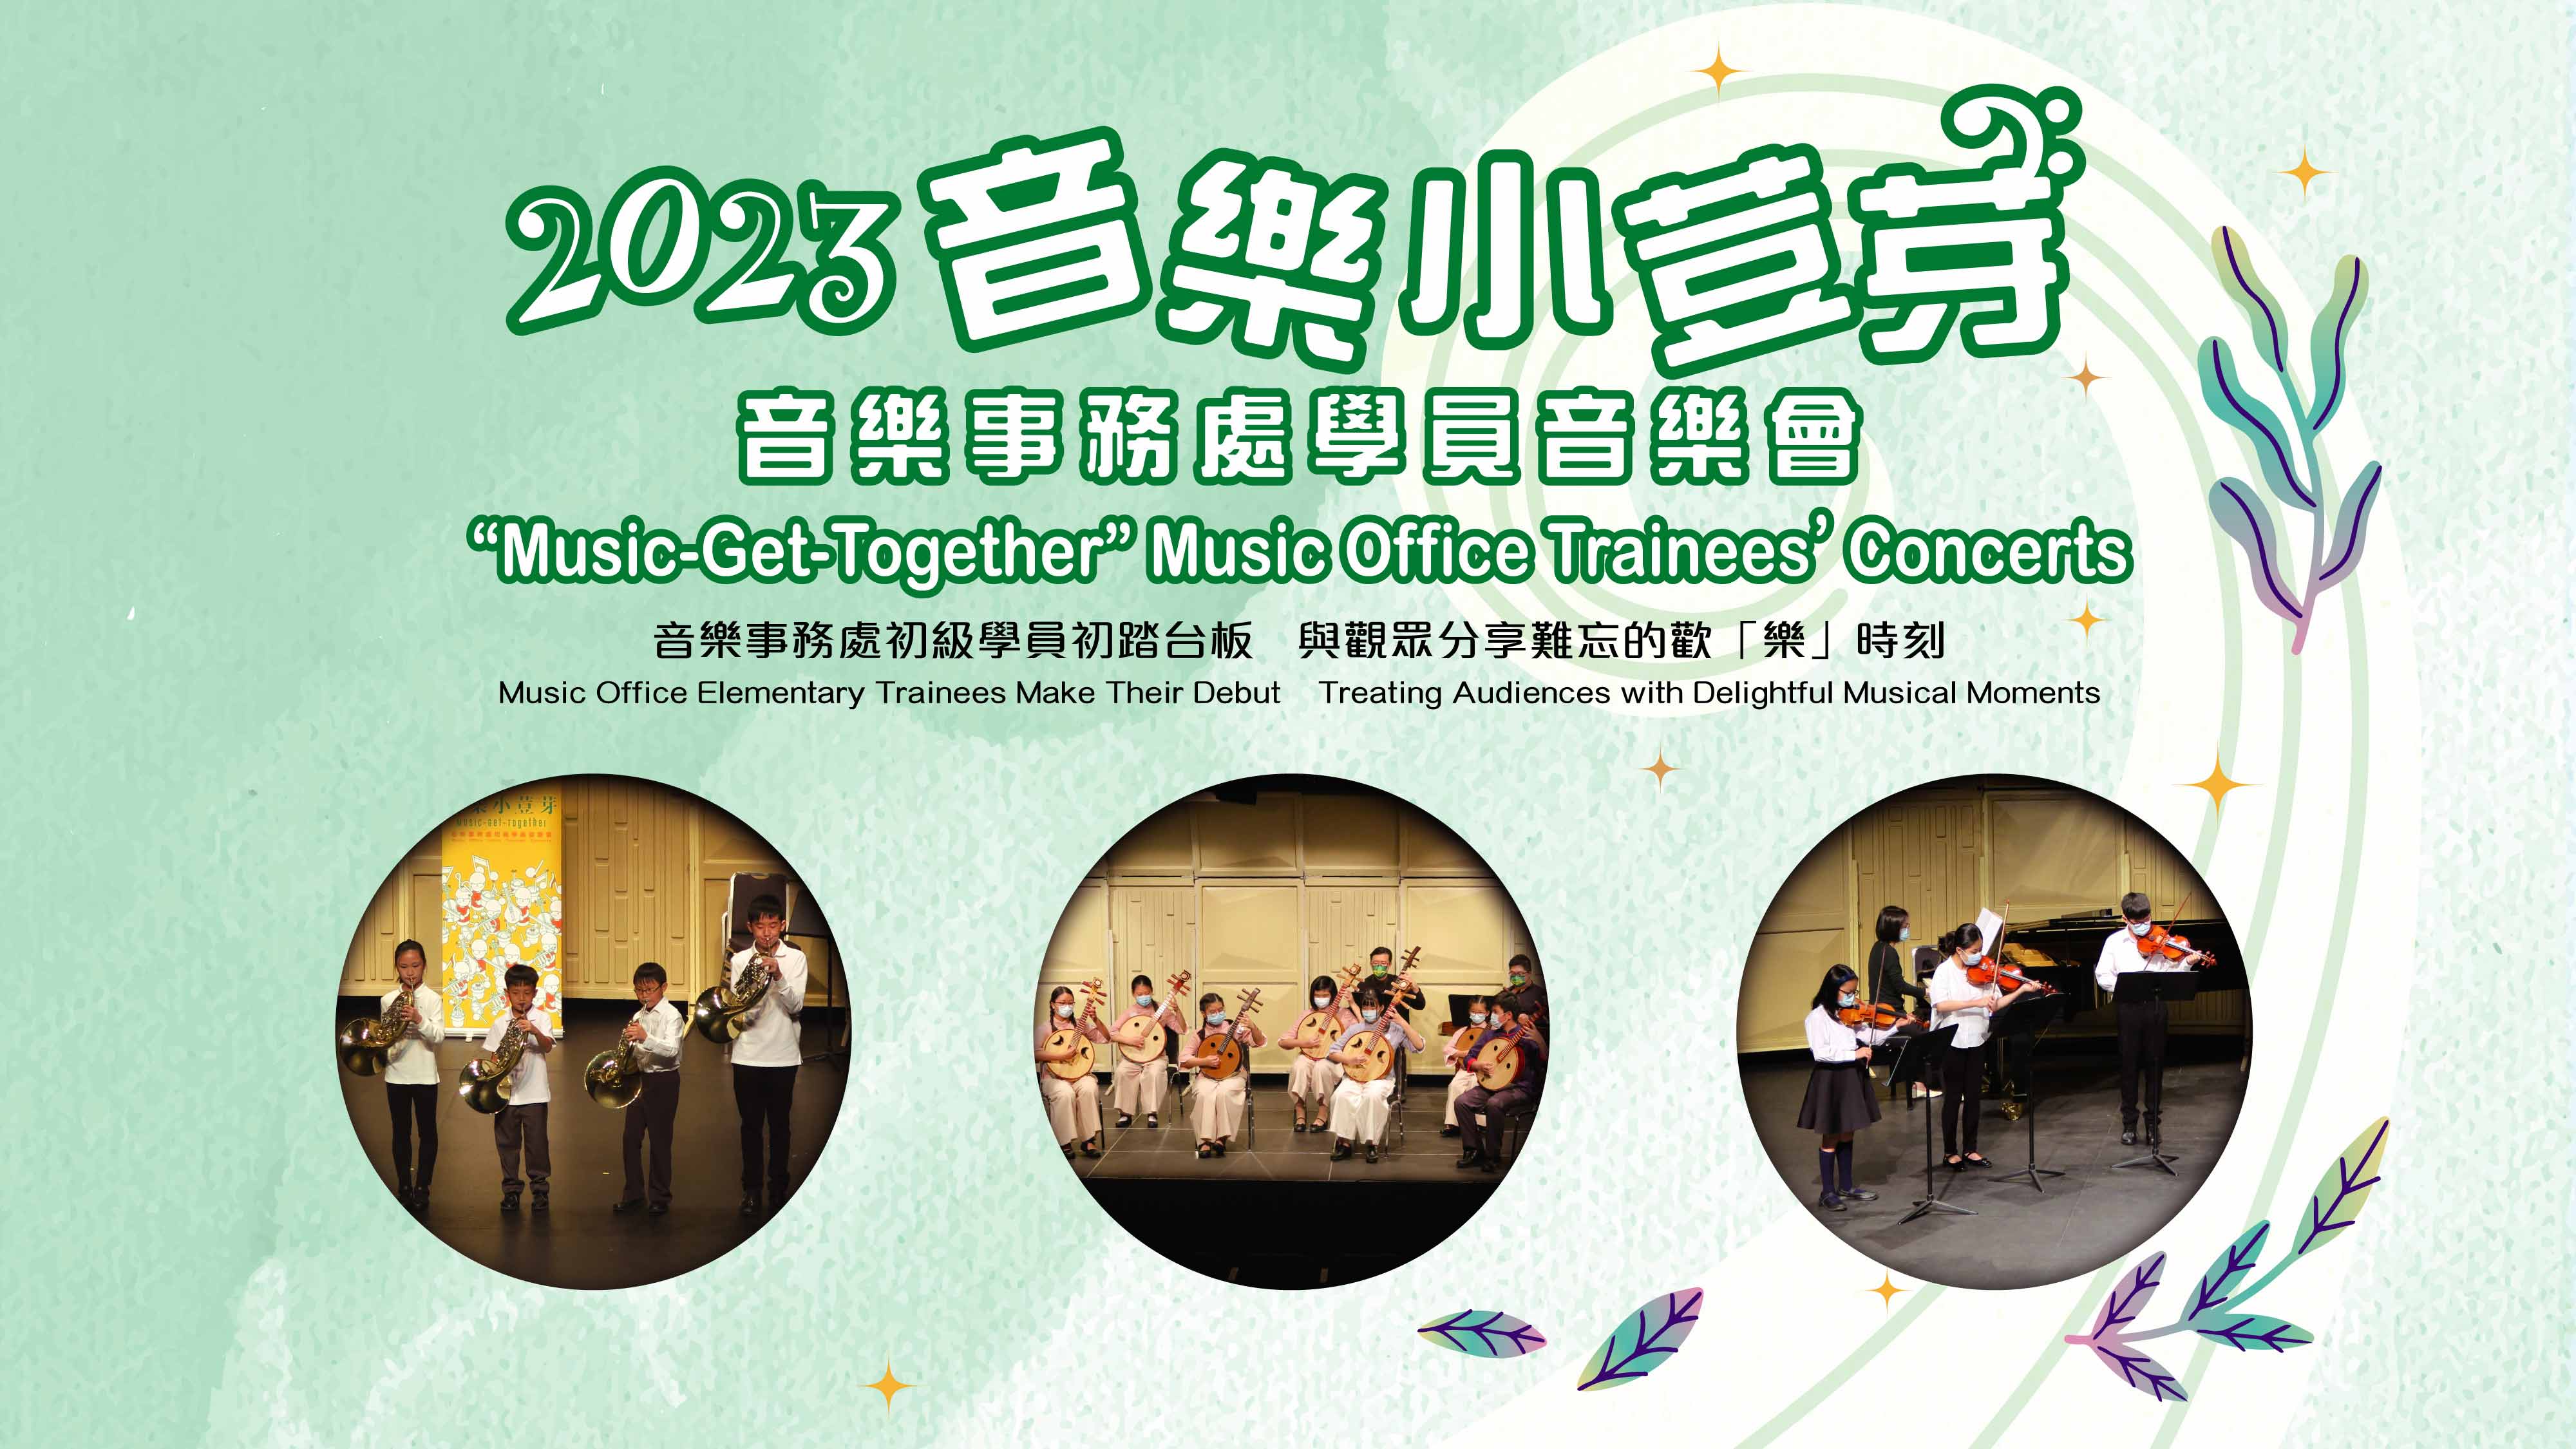 2023"Music-Get-Together" Music Office Trainees' Concerts (Completed)